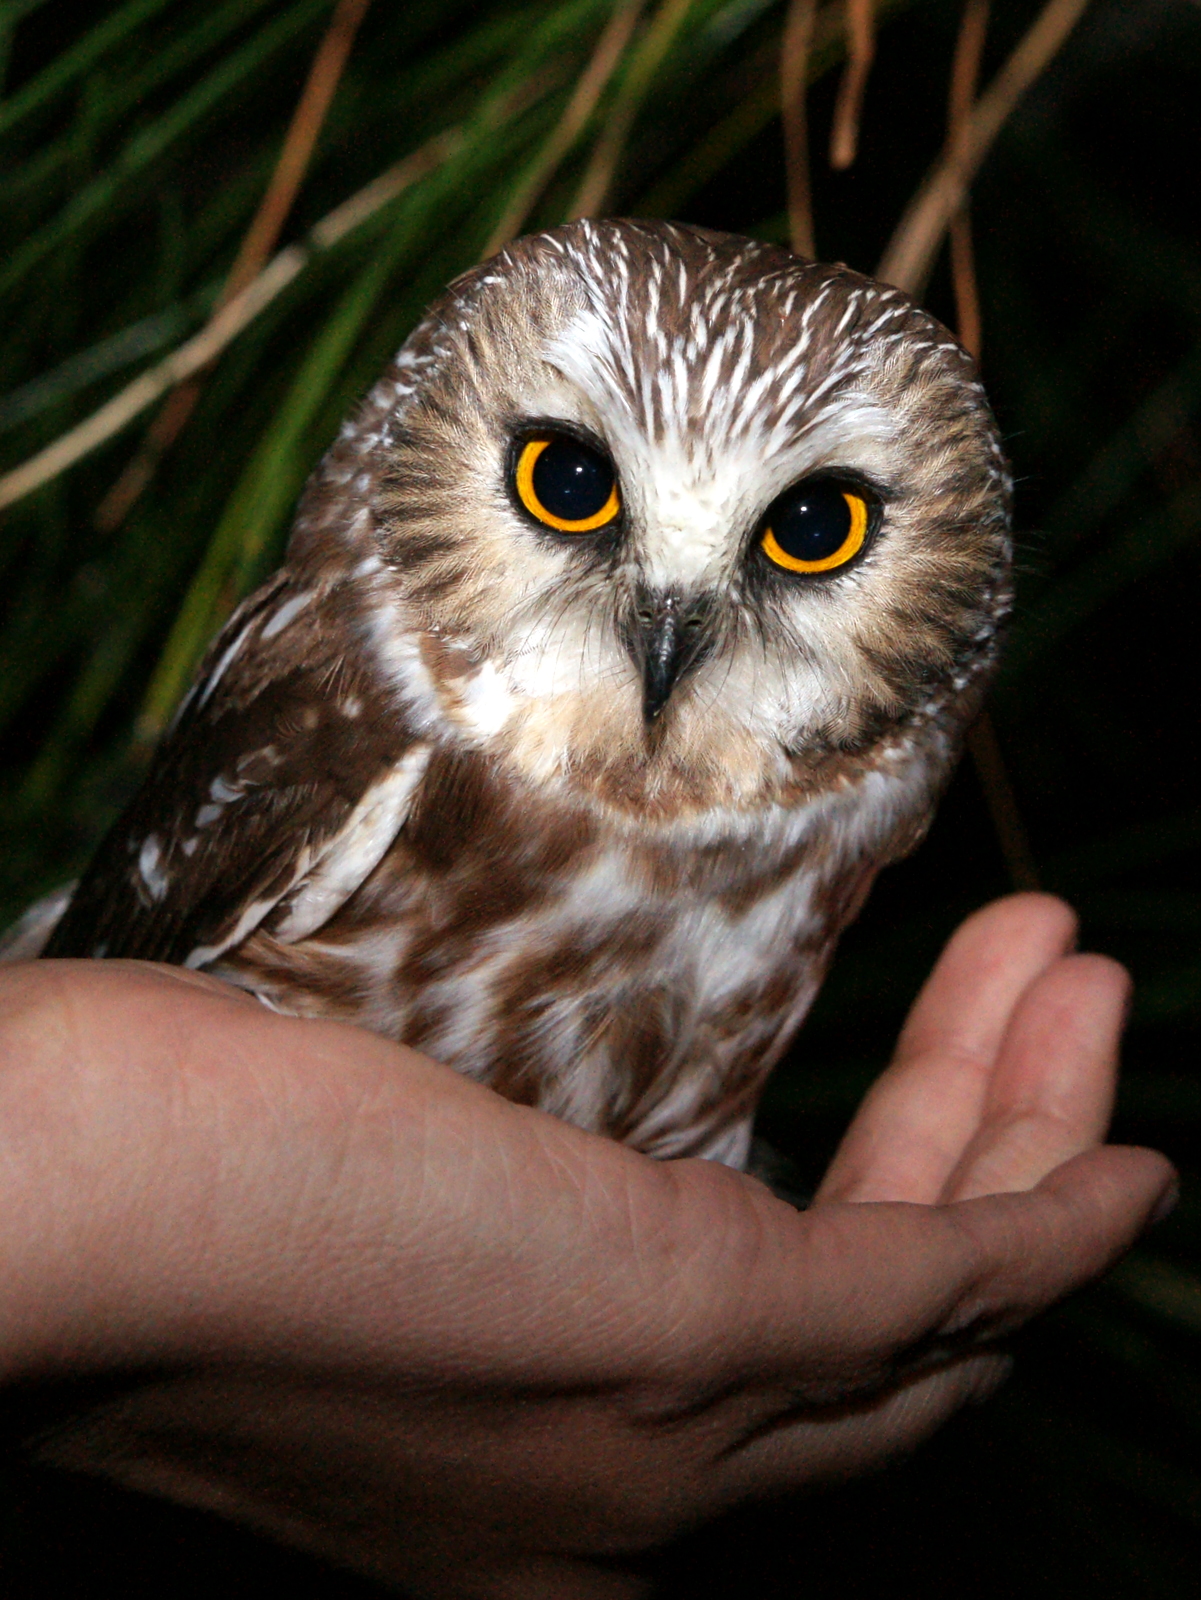 birdbling: IT'S FOR THE OWLS! 2 INCREDIBLE FUNDRAISING EXCURSIONS